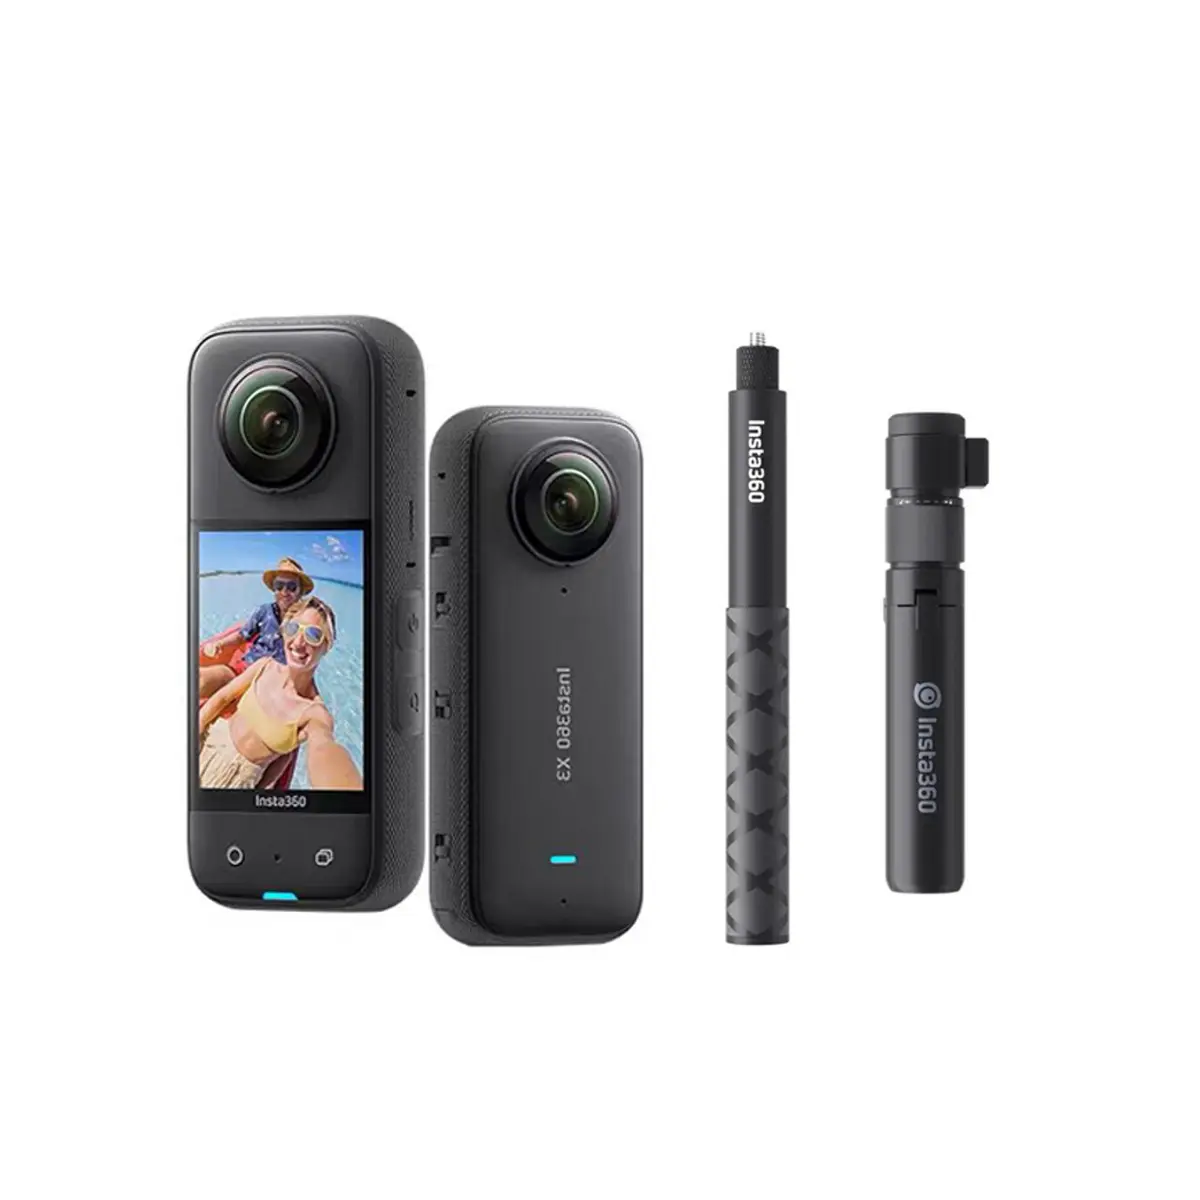 Main Image Insta360 One X3 Bullet Time Kit